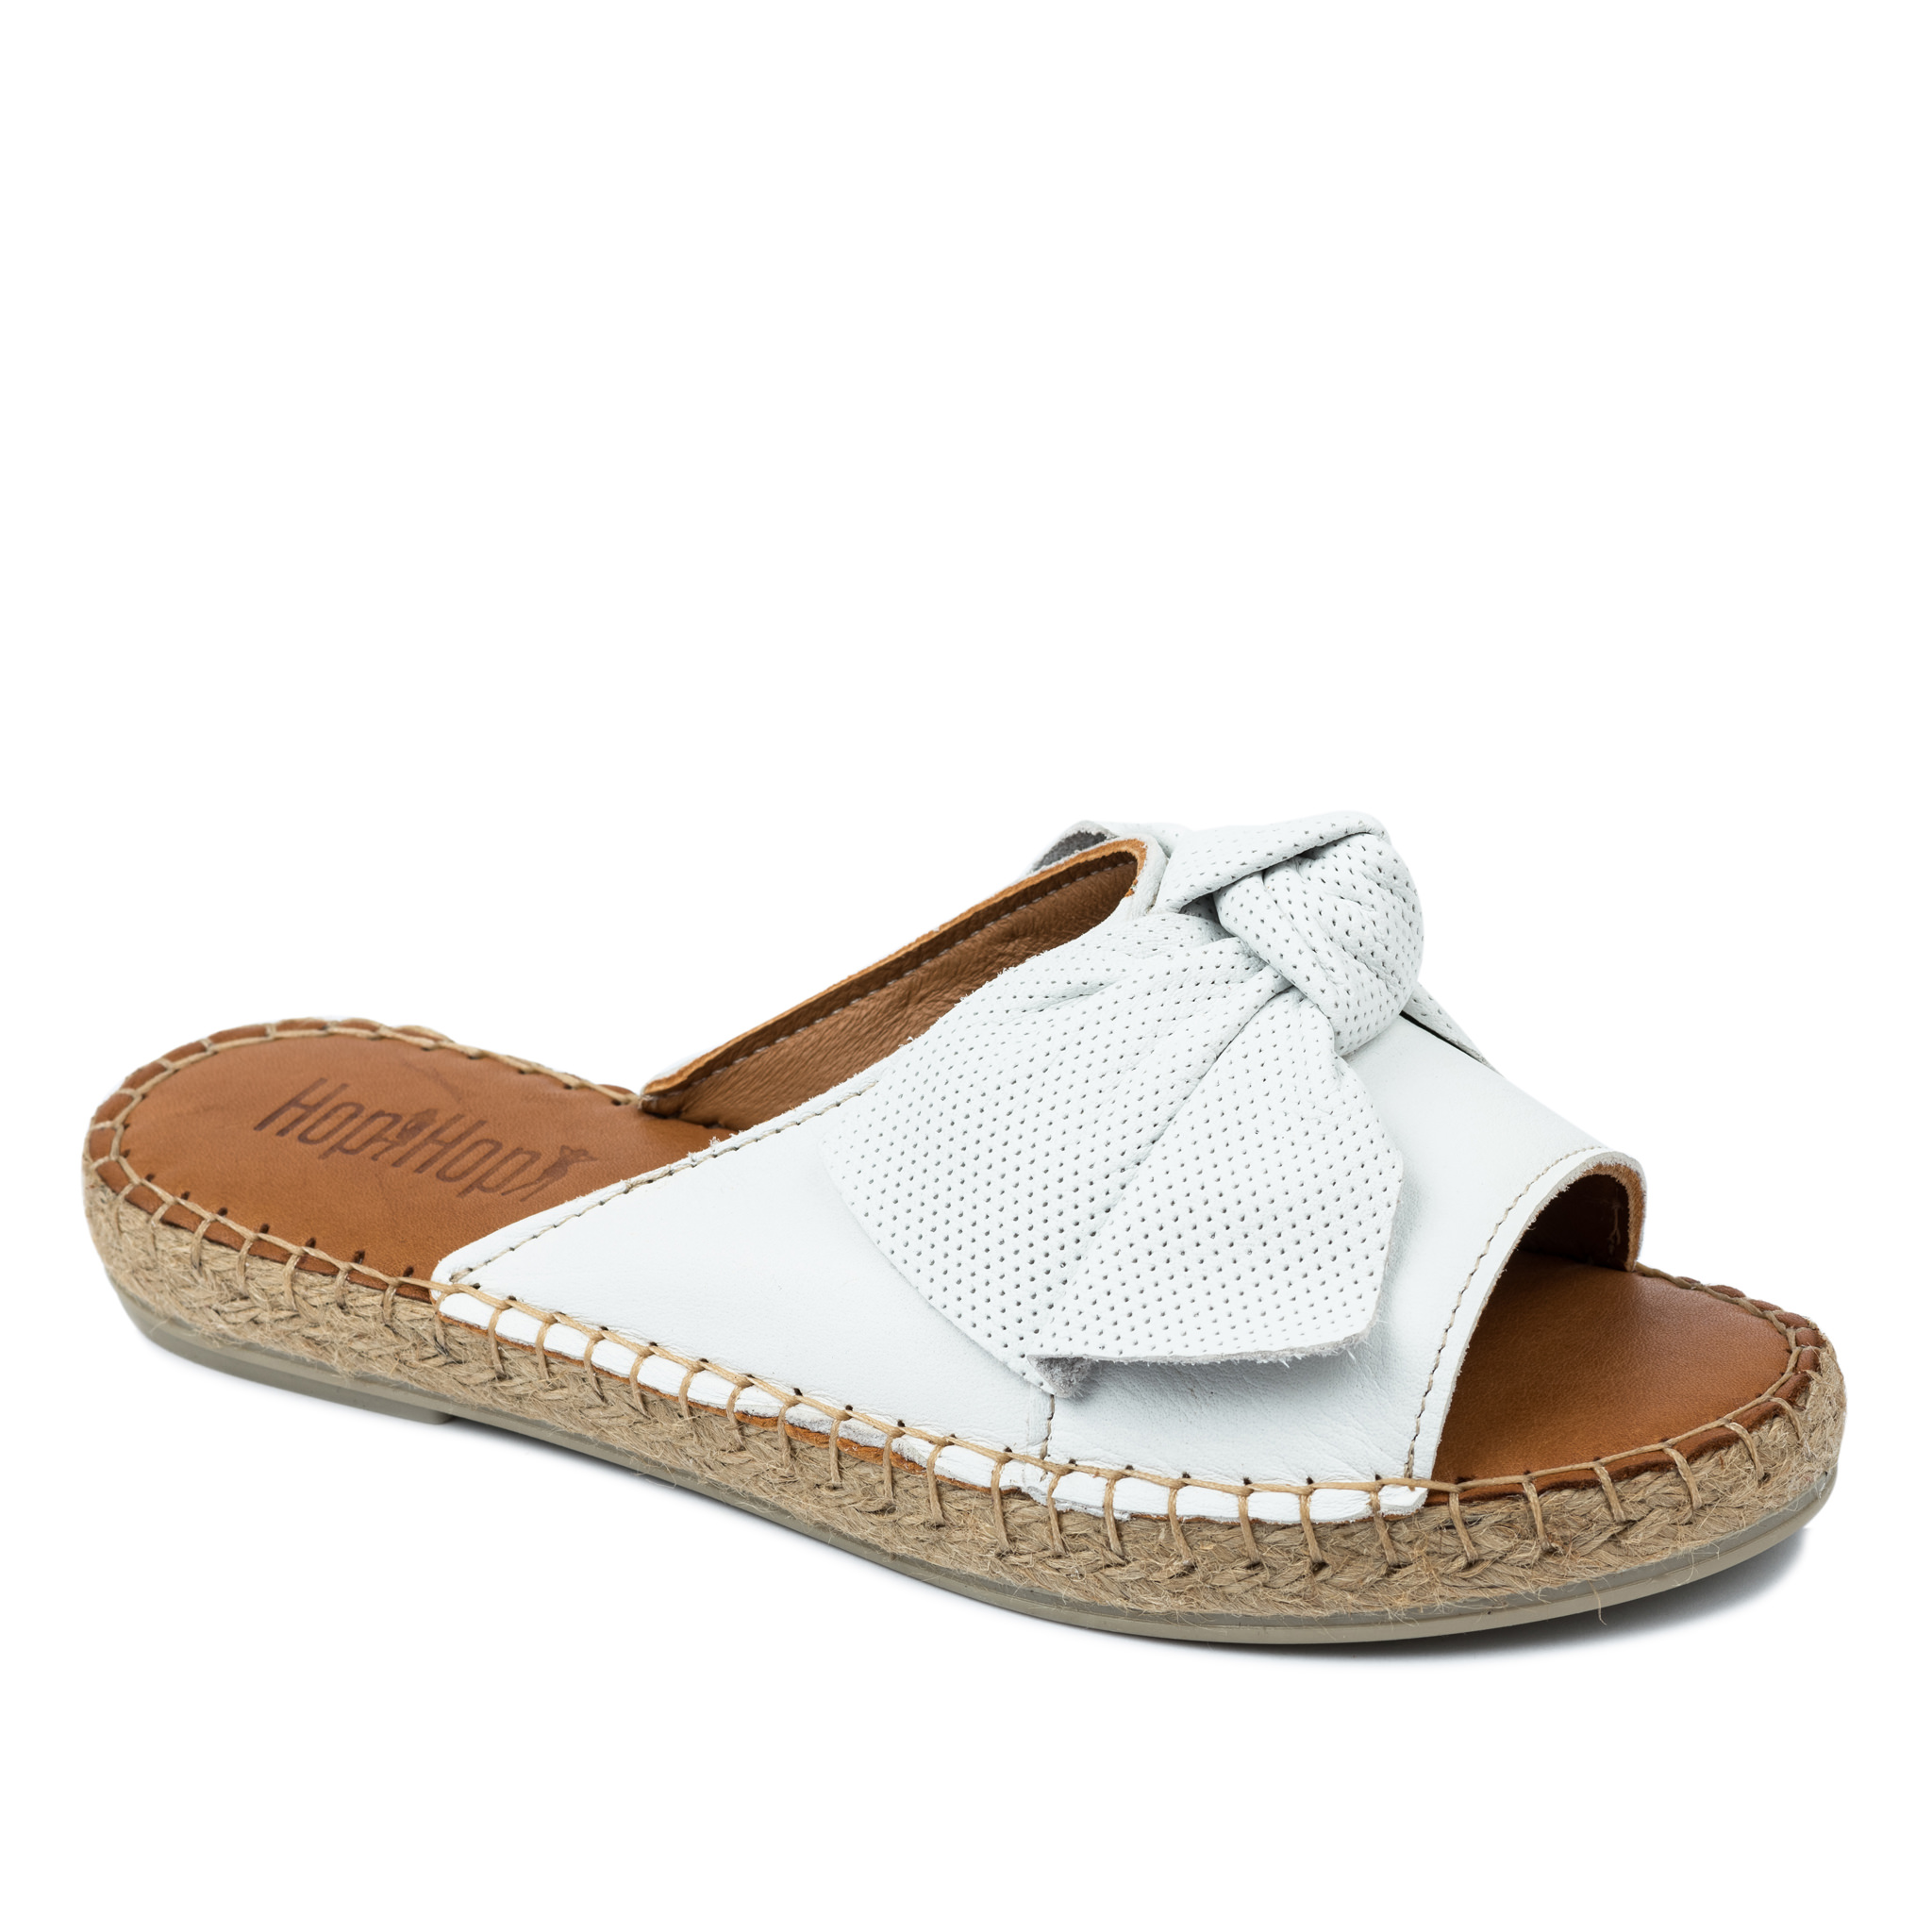 Leather slippers A689 - WHITE